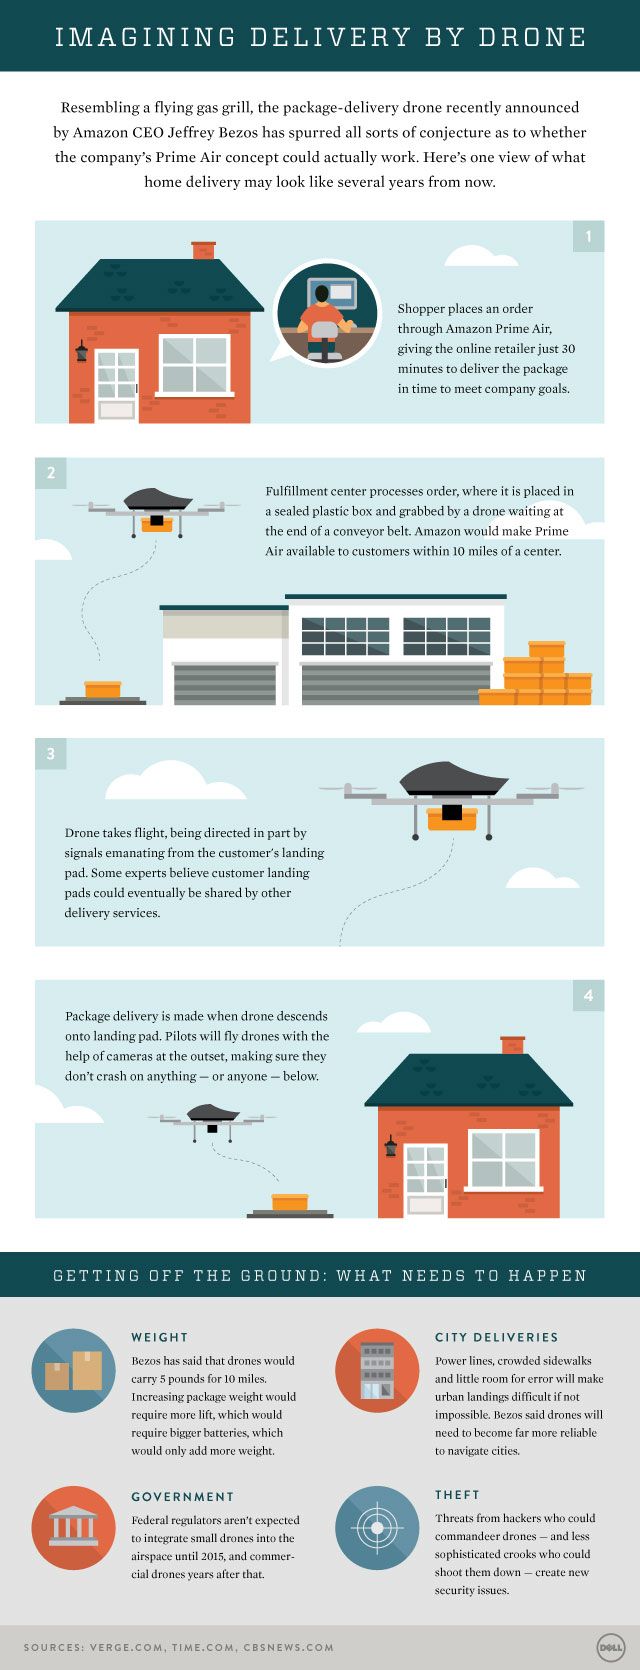 SJR Infographic // Tech Page One: Amazon Drone Delivery